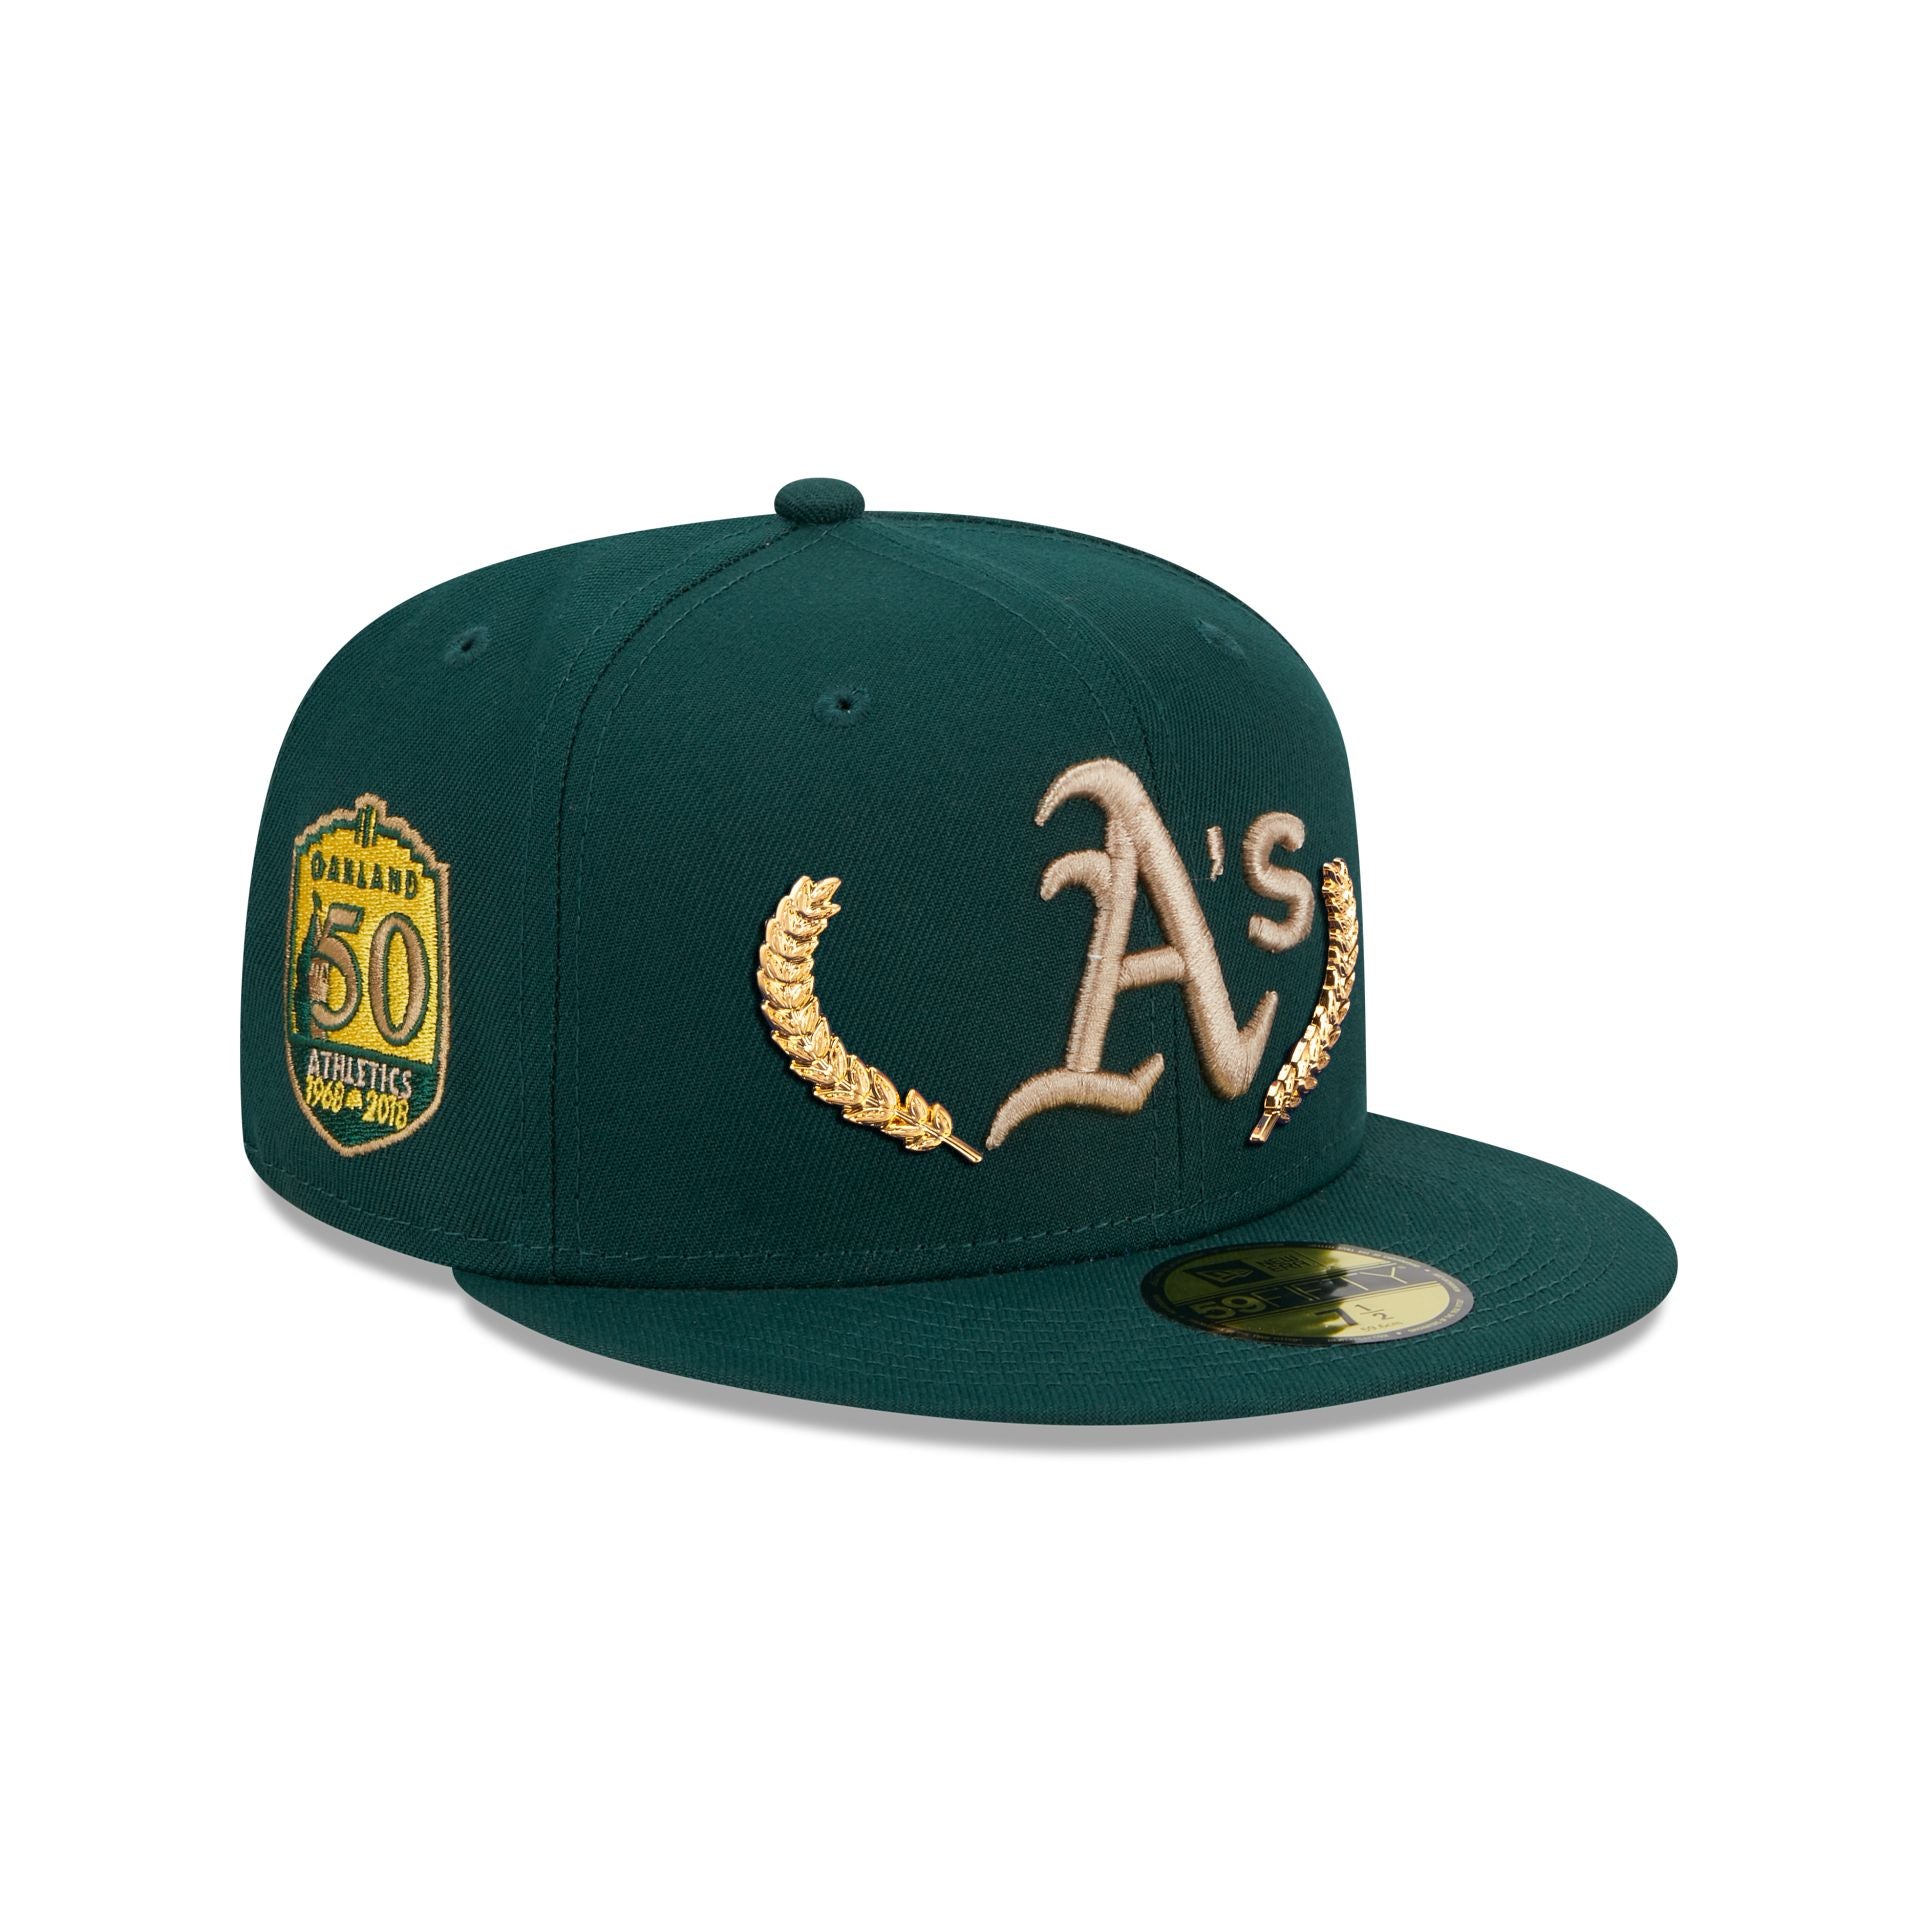 Oakland Athletics Gold Leaf 59FIFTY Fitted Hat, Green - Size: 7 3/8, MLB by New Era